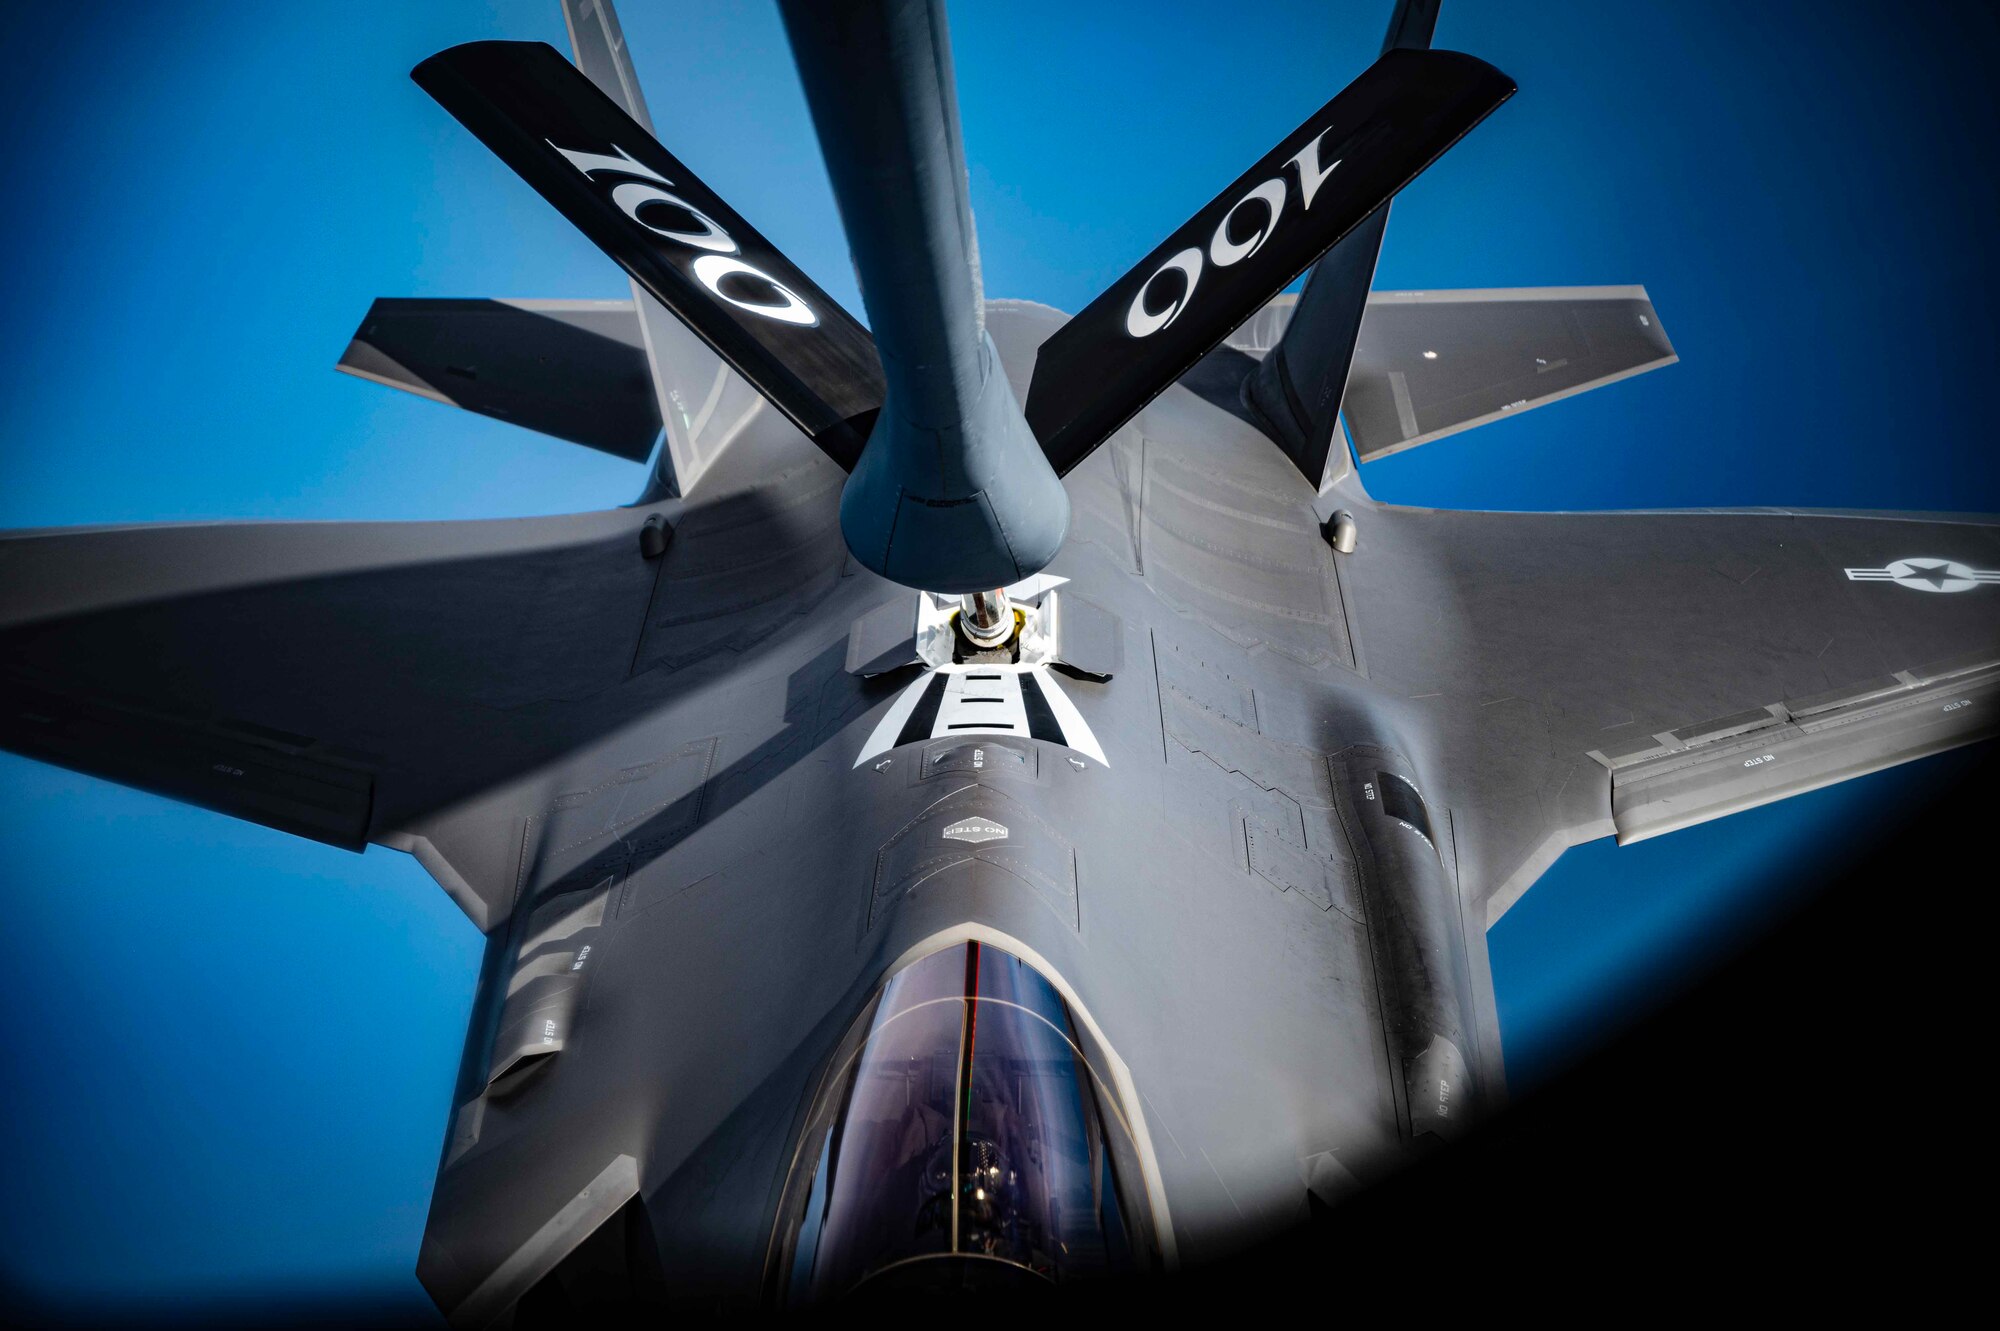 A U.S. Air Force F-35A Lightning II aircraft assigned to the 388th Fighter Wing, Hill Air Force Base, Utah, receives aerial refueling via a KC-135 Stratotanker aircraft from the 100th Air Refueling Wing, Royal Air Force Mildenhall, England, during a coronet line over the mediterranean, July 25, 2023.